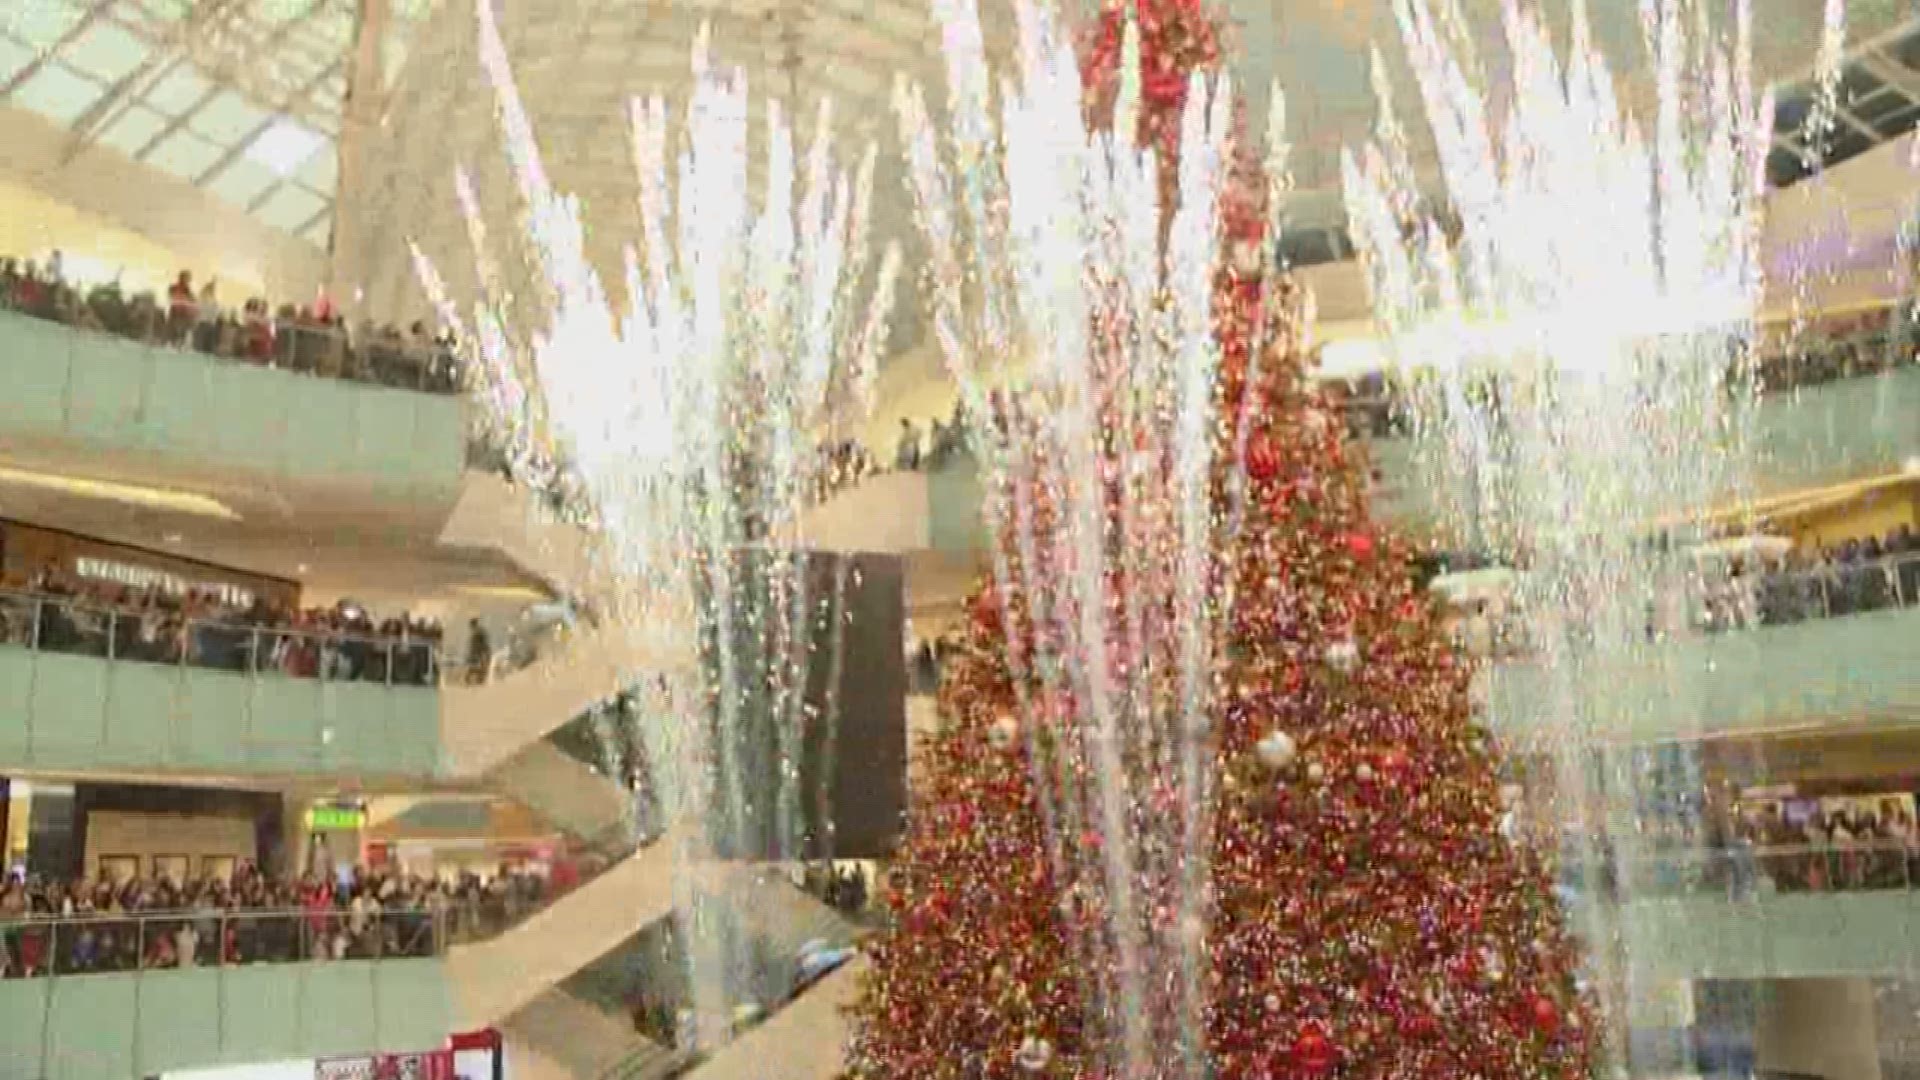 About 10,000 people surrounded the 95-foot tree. It is recorded as the country's tallest indoor Christmas tree.